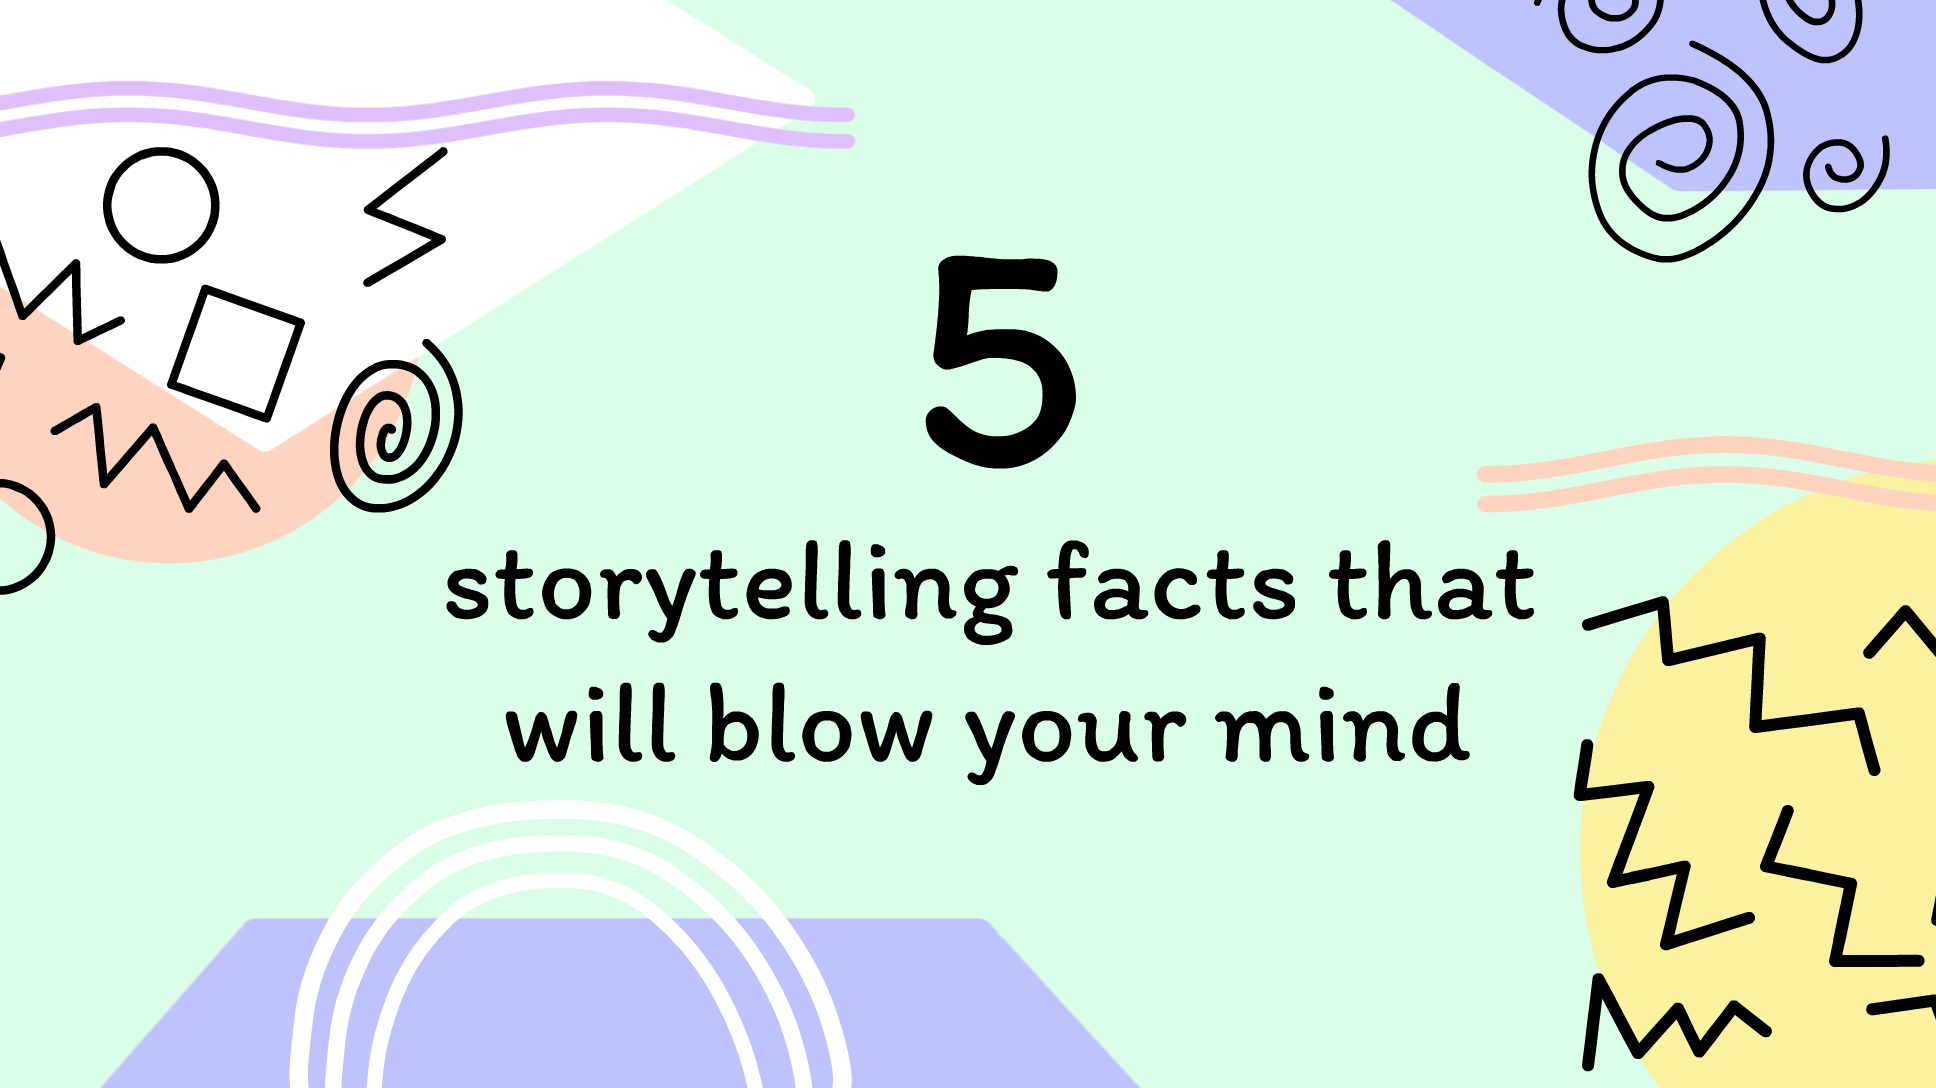 5 storytelling facts that will blow your mind